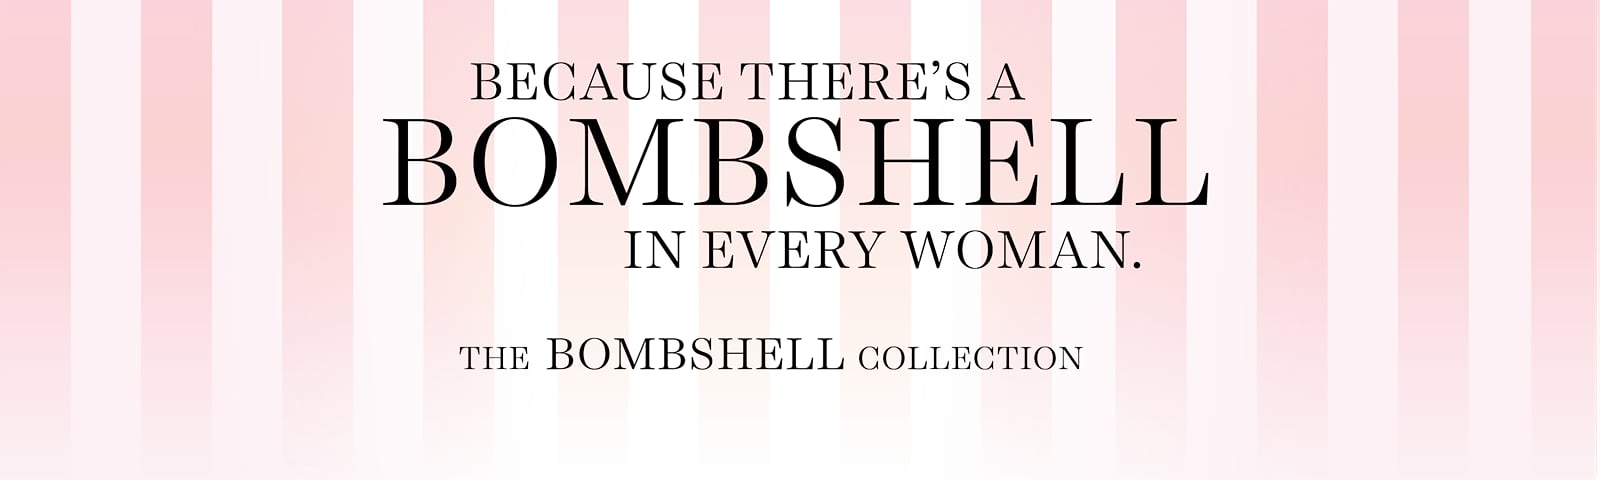 Because There Is A Bombshell In Every Woman. The Bombshell Collection